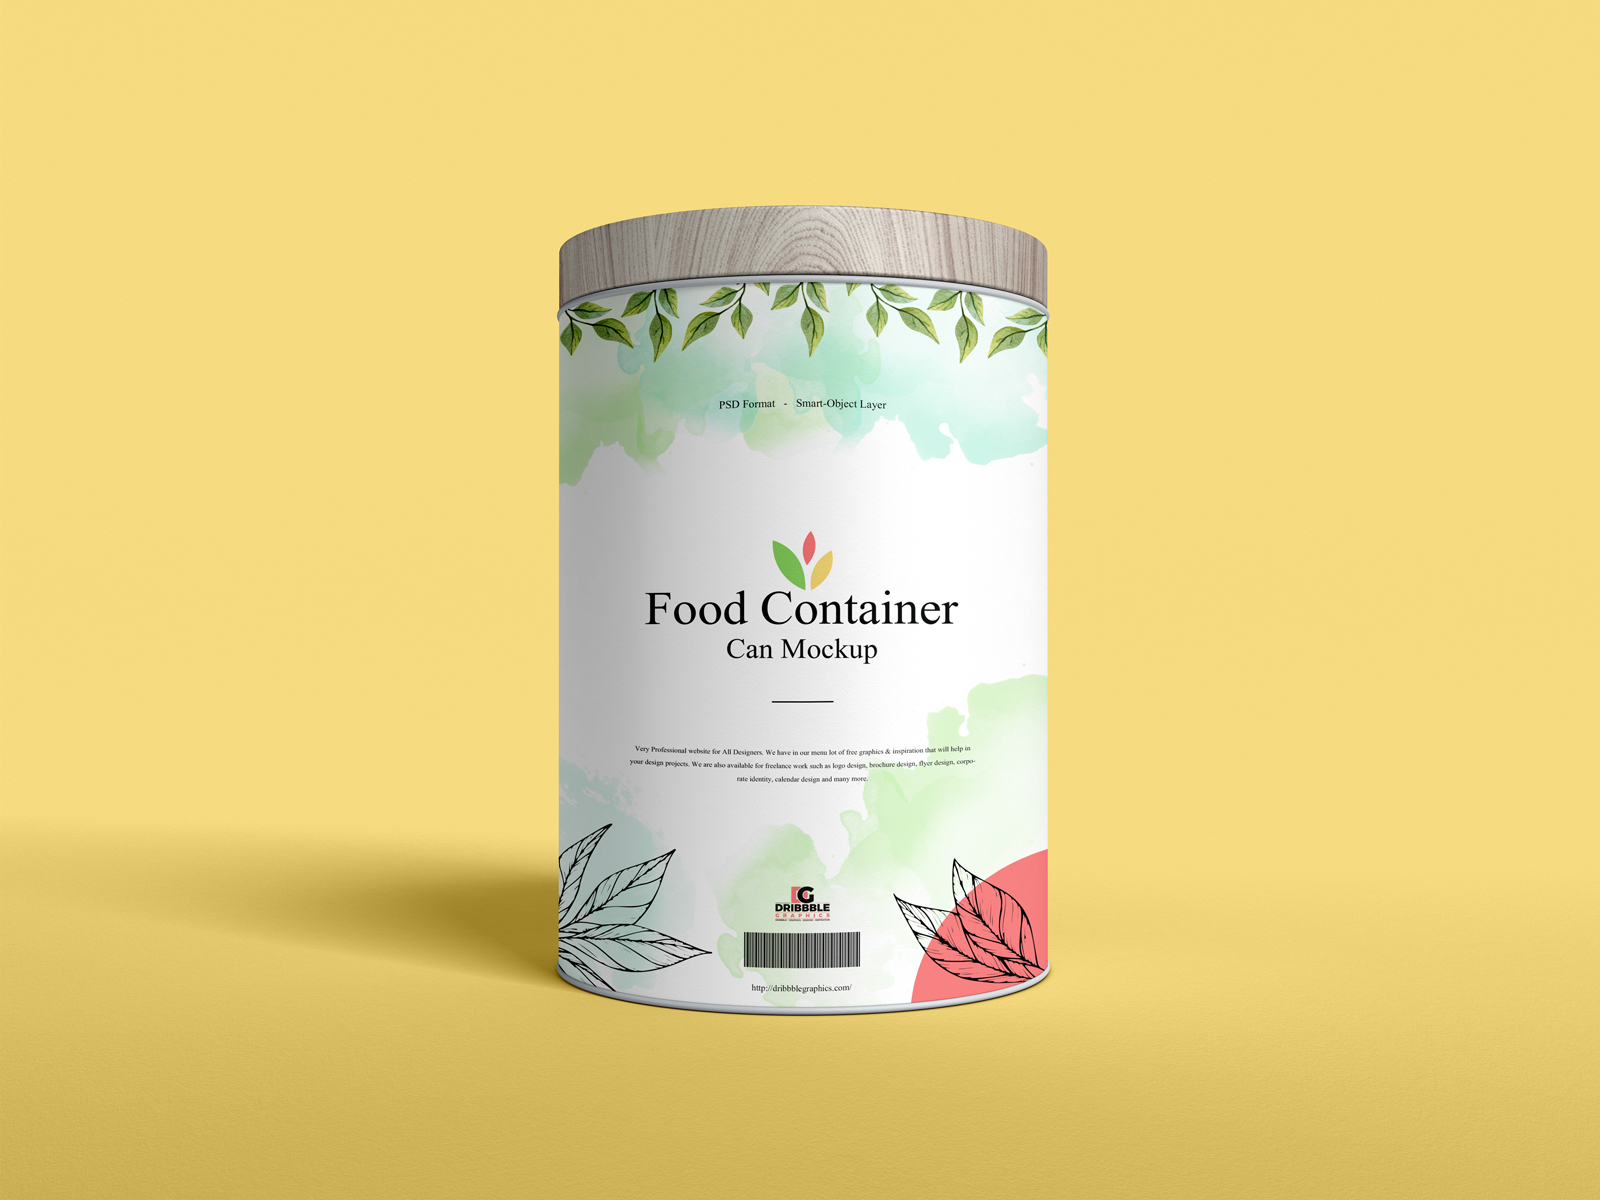 Download Free Food Container Can Mockup By Jessica Elle On Dribbble